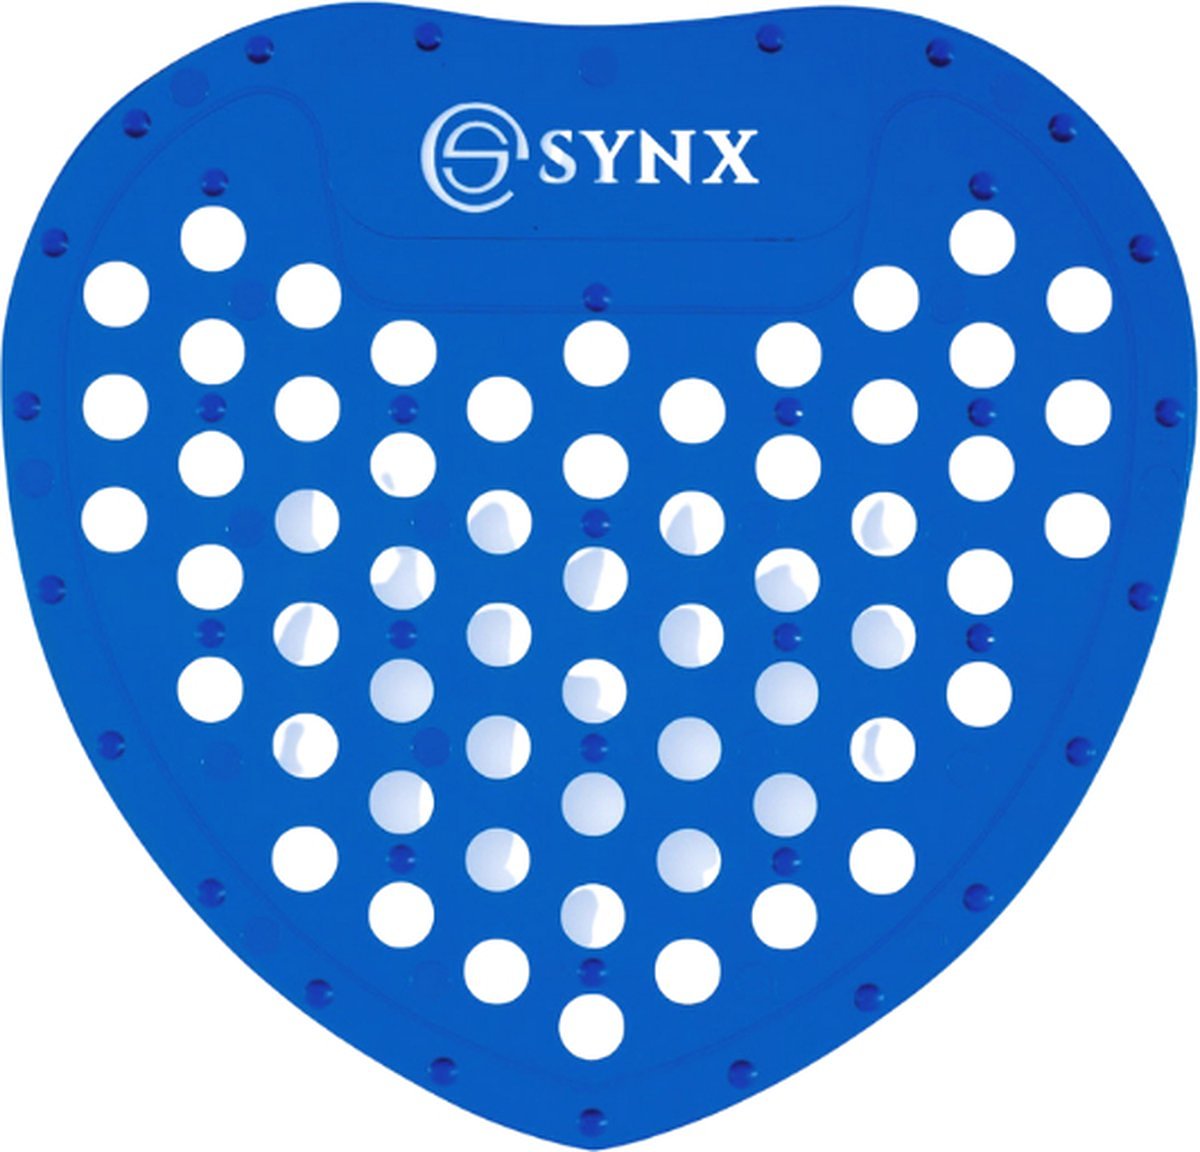 Synx Tools Urinoir Matje - Urinoirrooster -  Wc Rooster